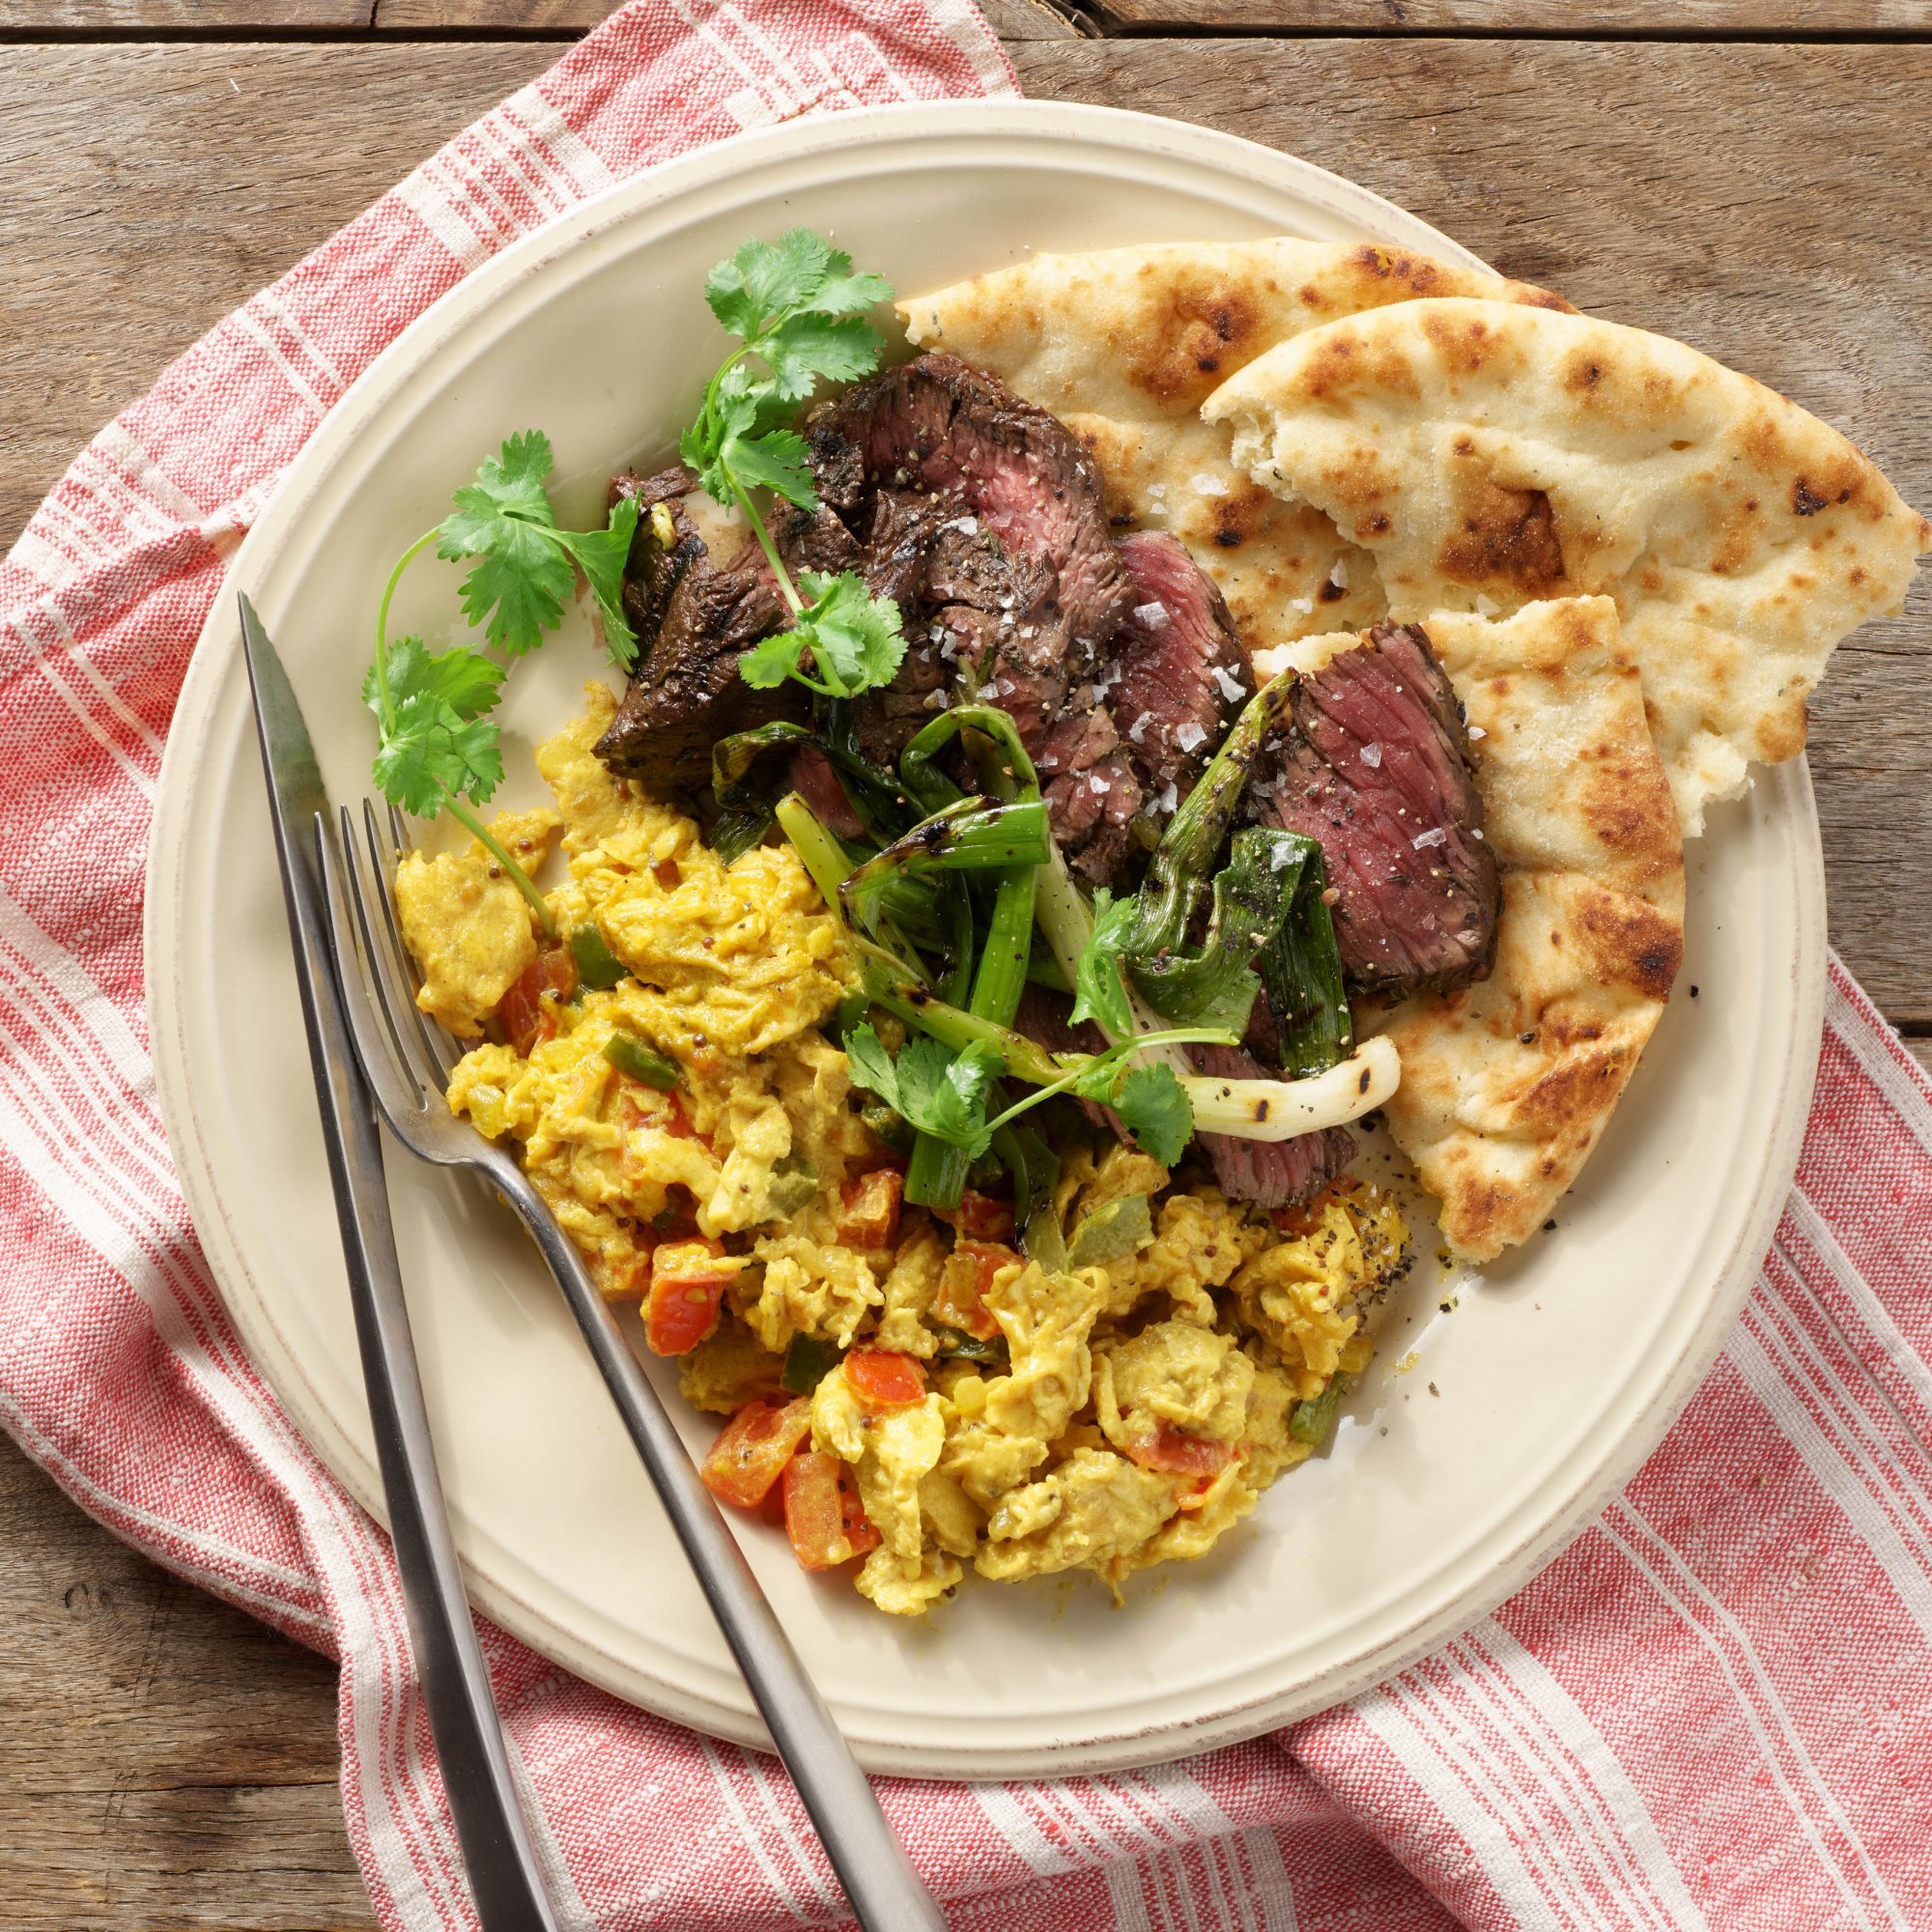 Rachael Ray's Hanger Steak with Scallions & Lime with Anda Bhurji (Indian-Style Scrambled Eggs)